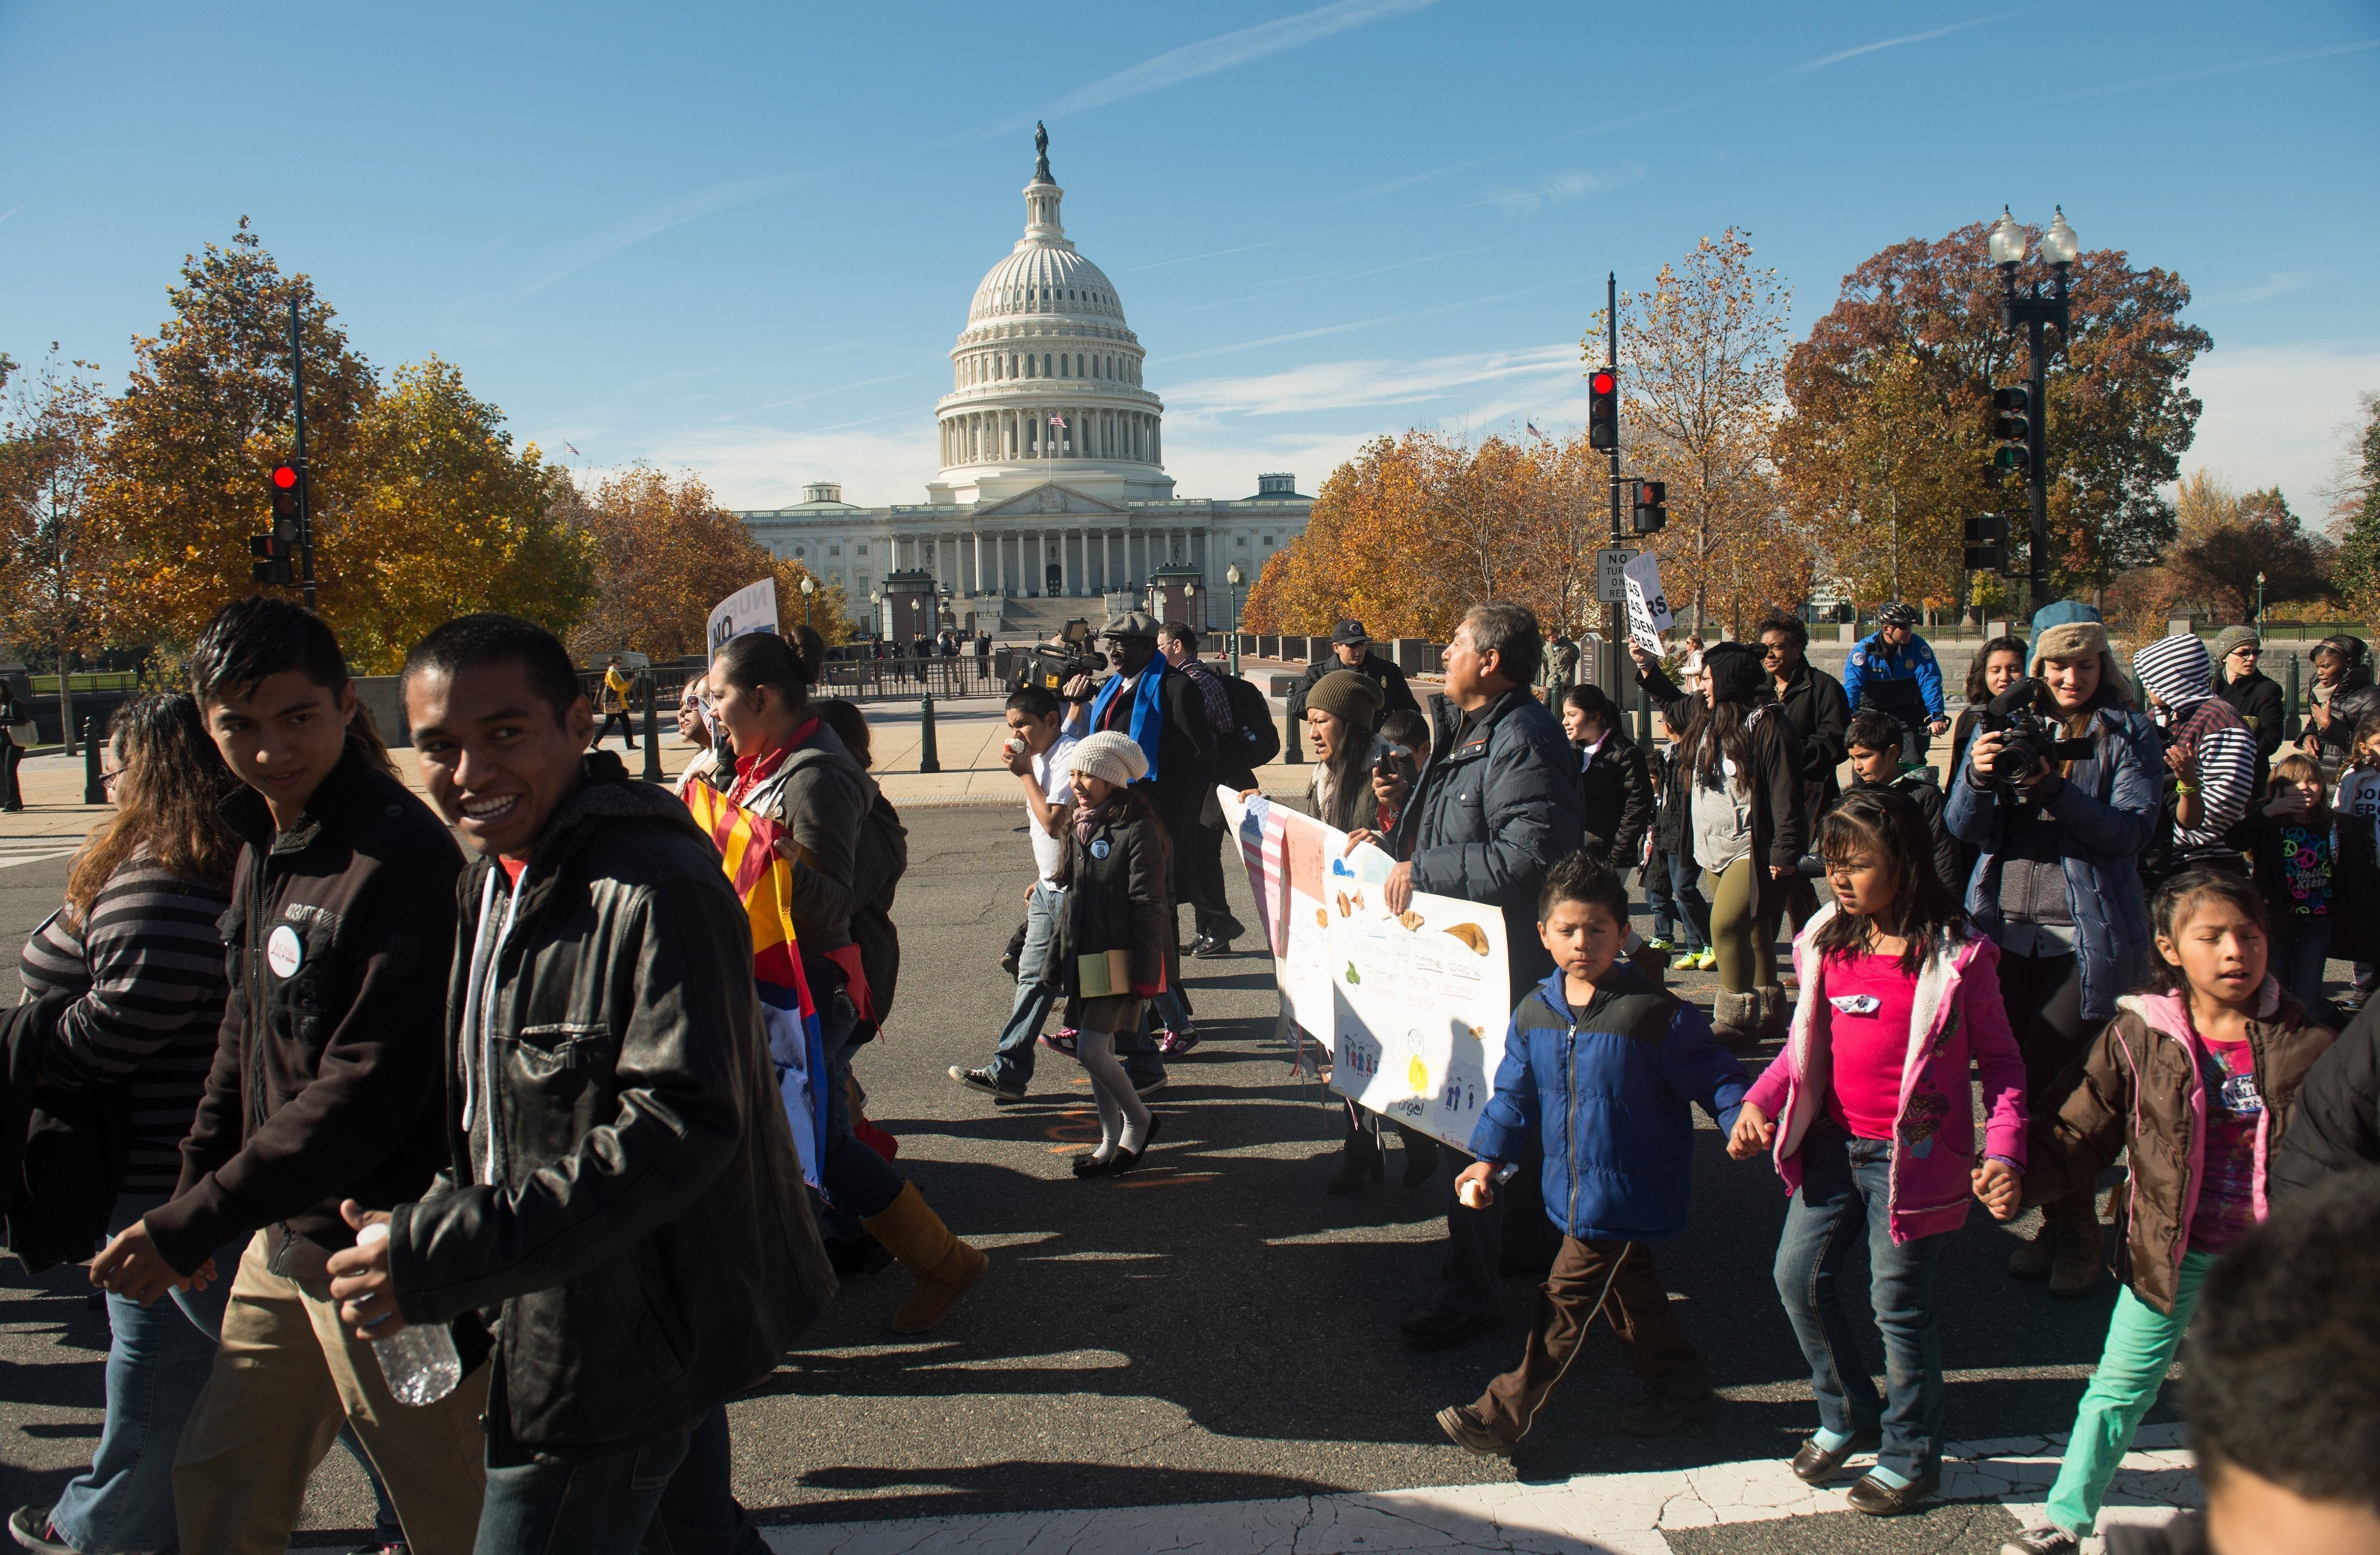 Marchers with the Fair Immigration Reform Movement and its Keeping Families Together: Youth in Action campaign march past the U.S. Capitol in Washington, D.C., on, Nov. 14, 2013. (J.M. Eddins Jr. / MCT / Getty Images)